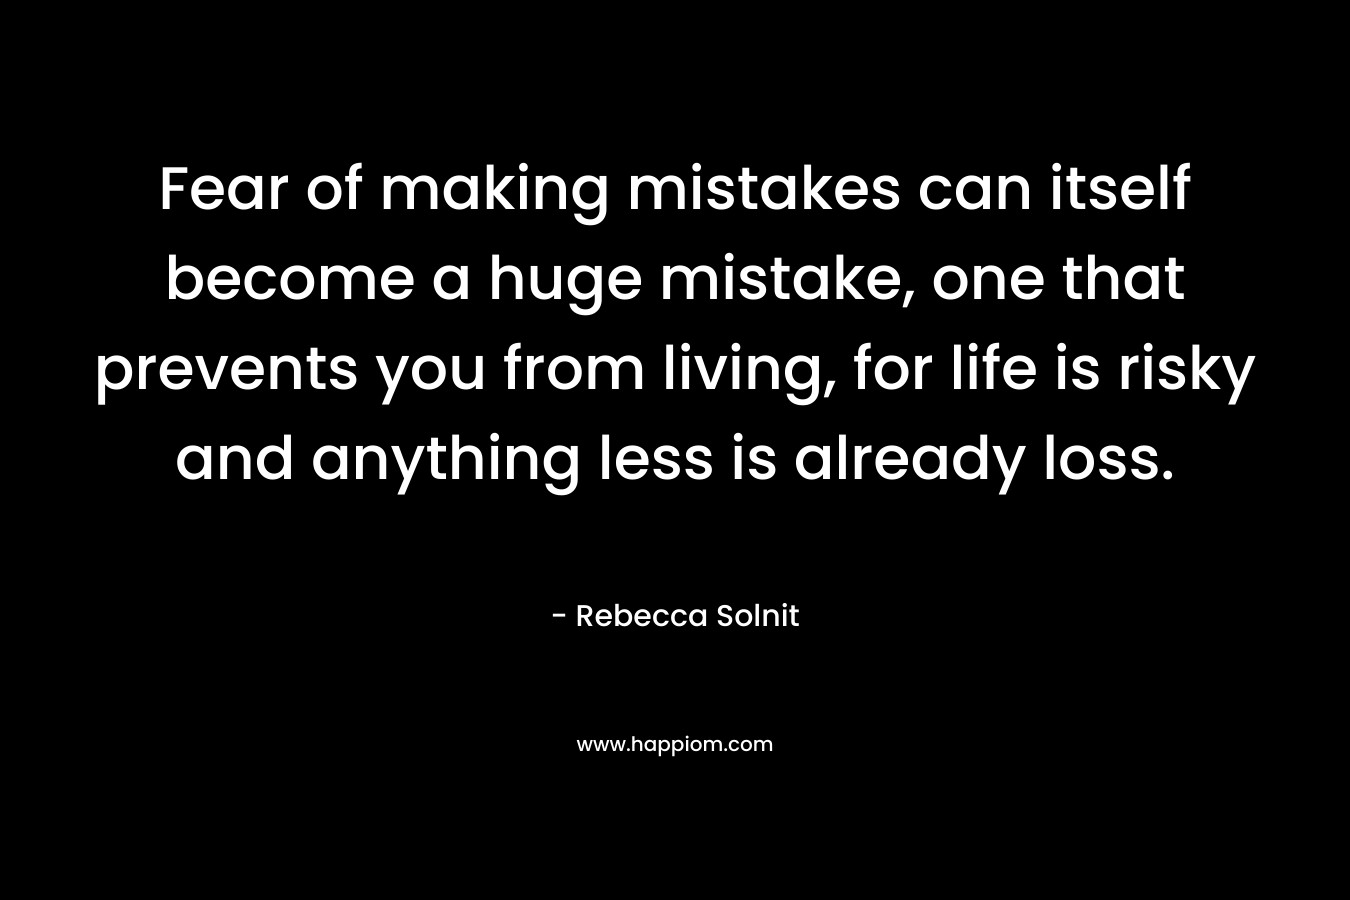 Fear of making mistakes can itself become a huge mistake, one that prevents you from living, for life is risky and anything less is already loss.